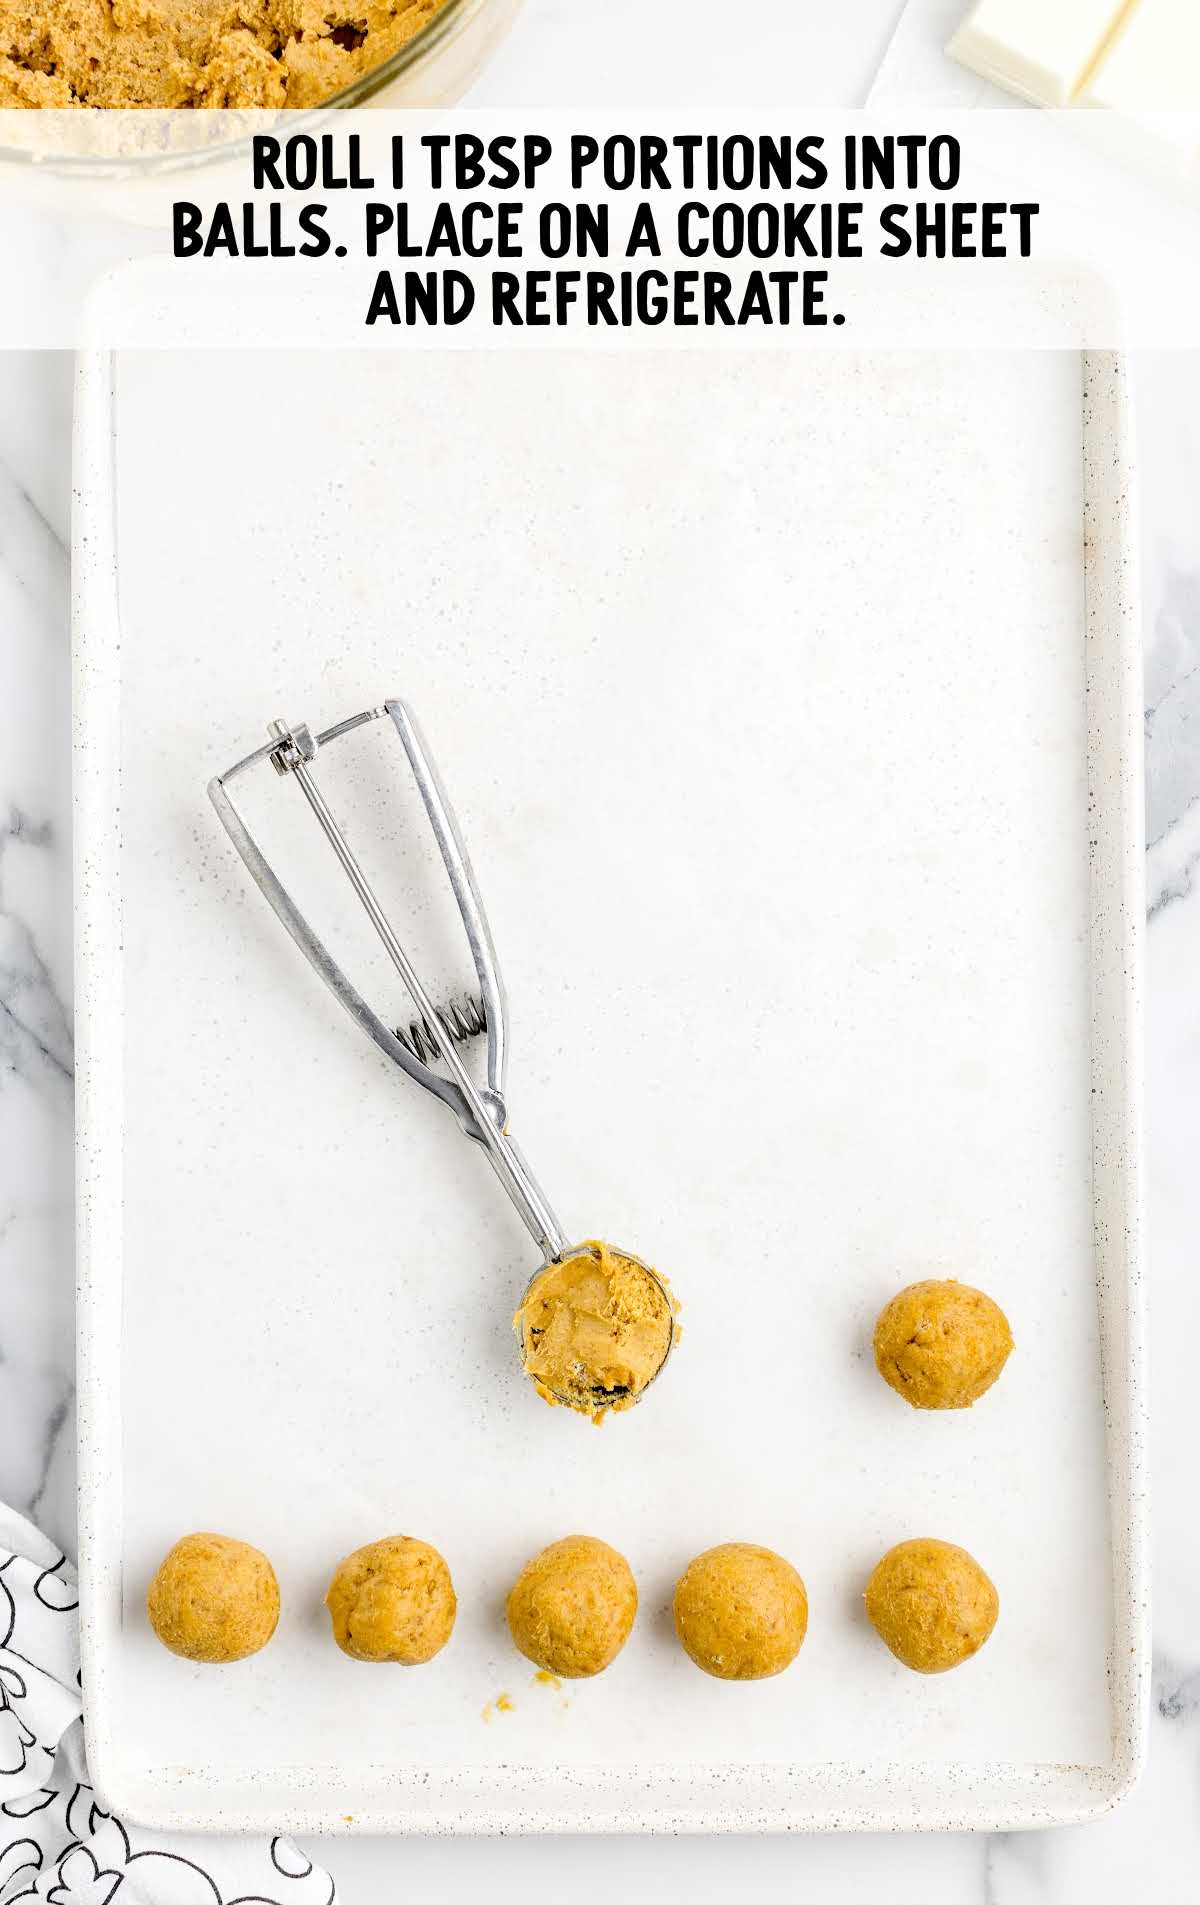 white chocolate mixture rolled into balls and placed in a cookie sheet